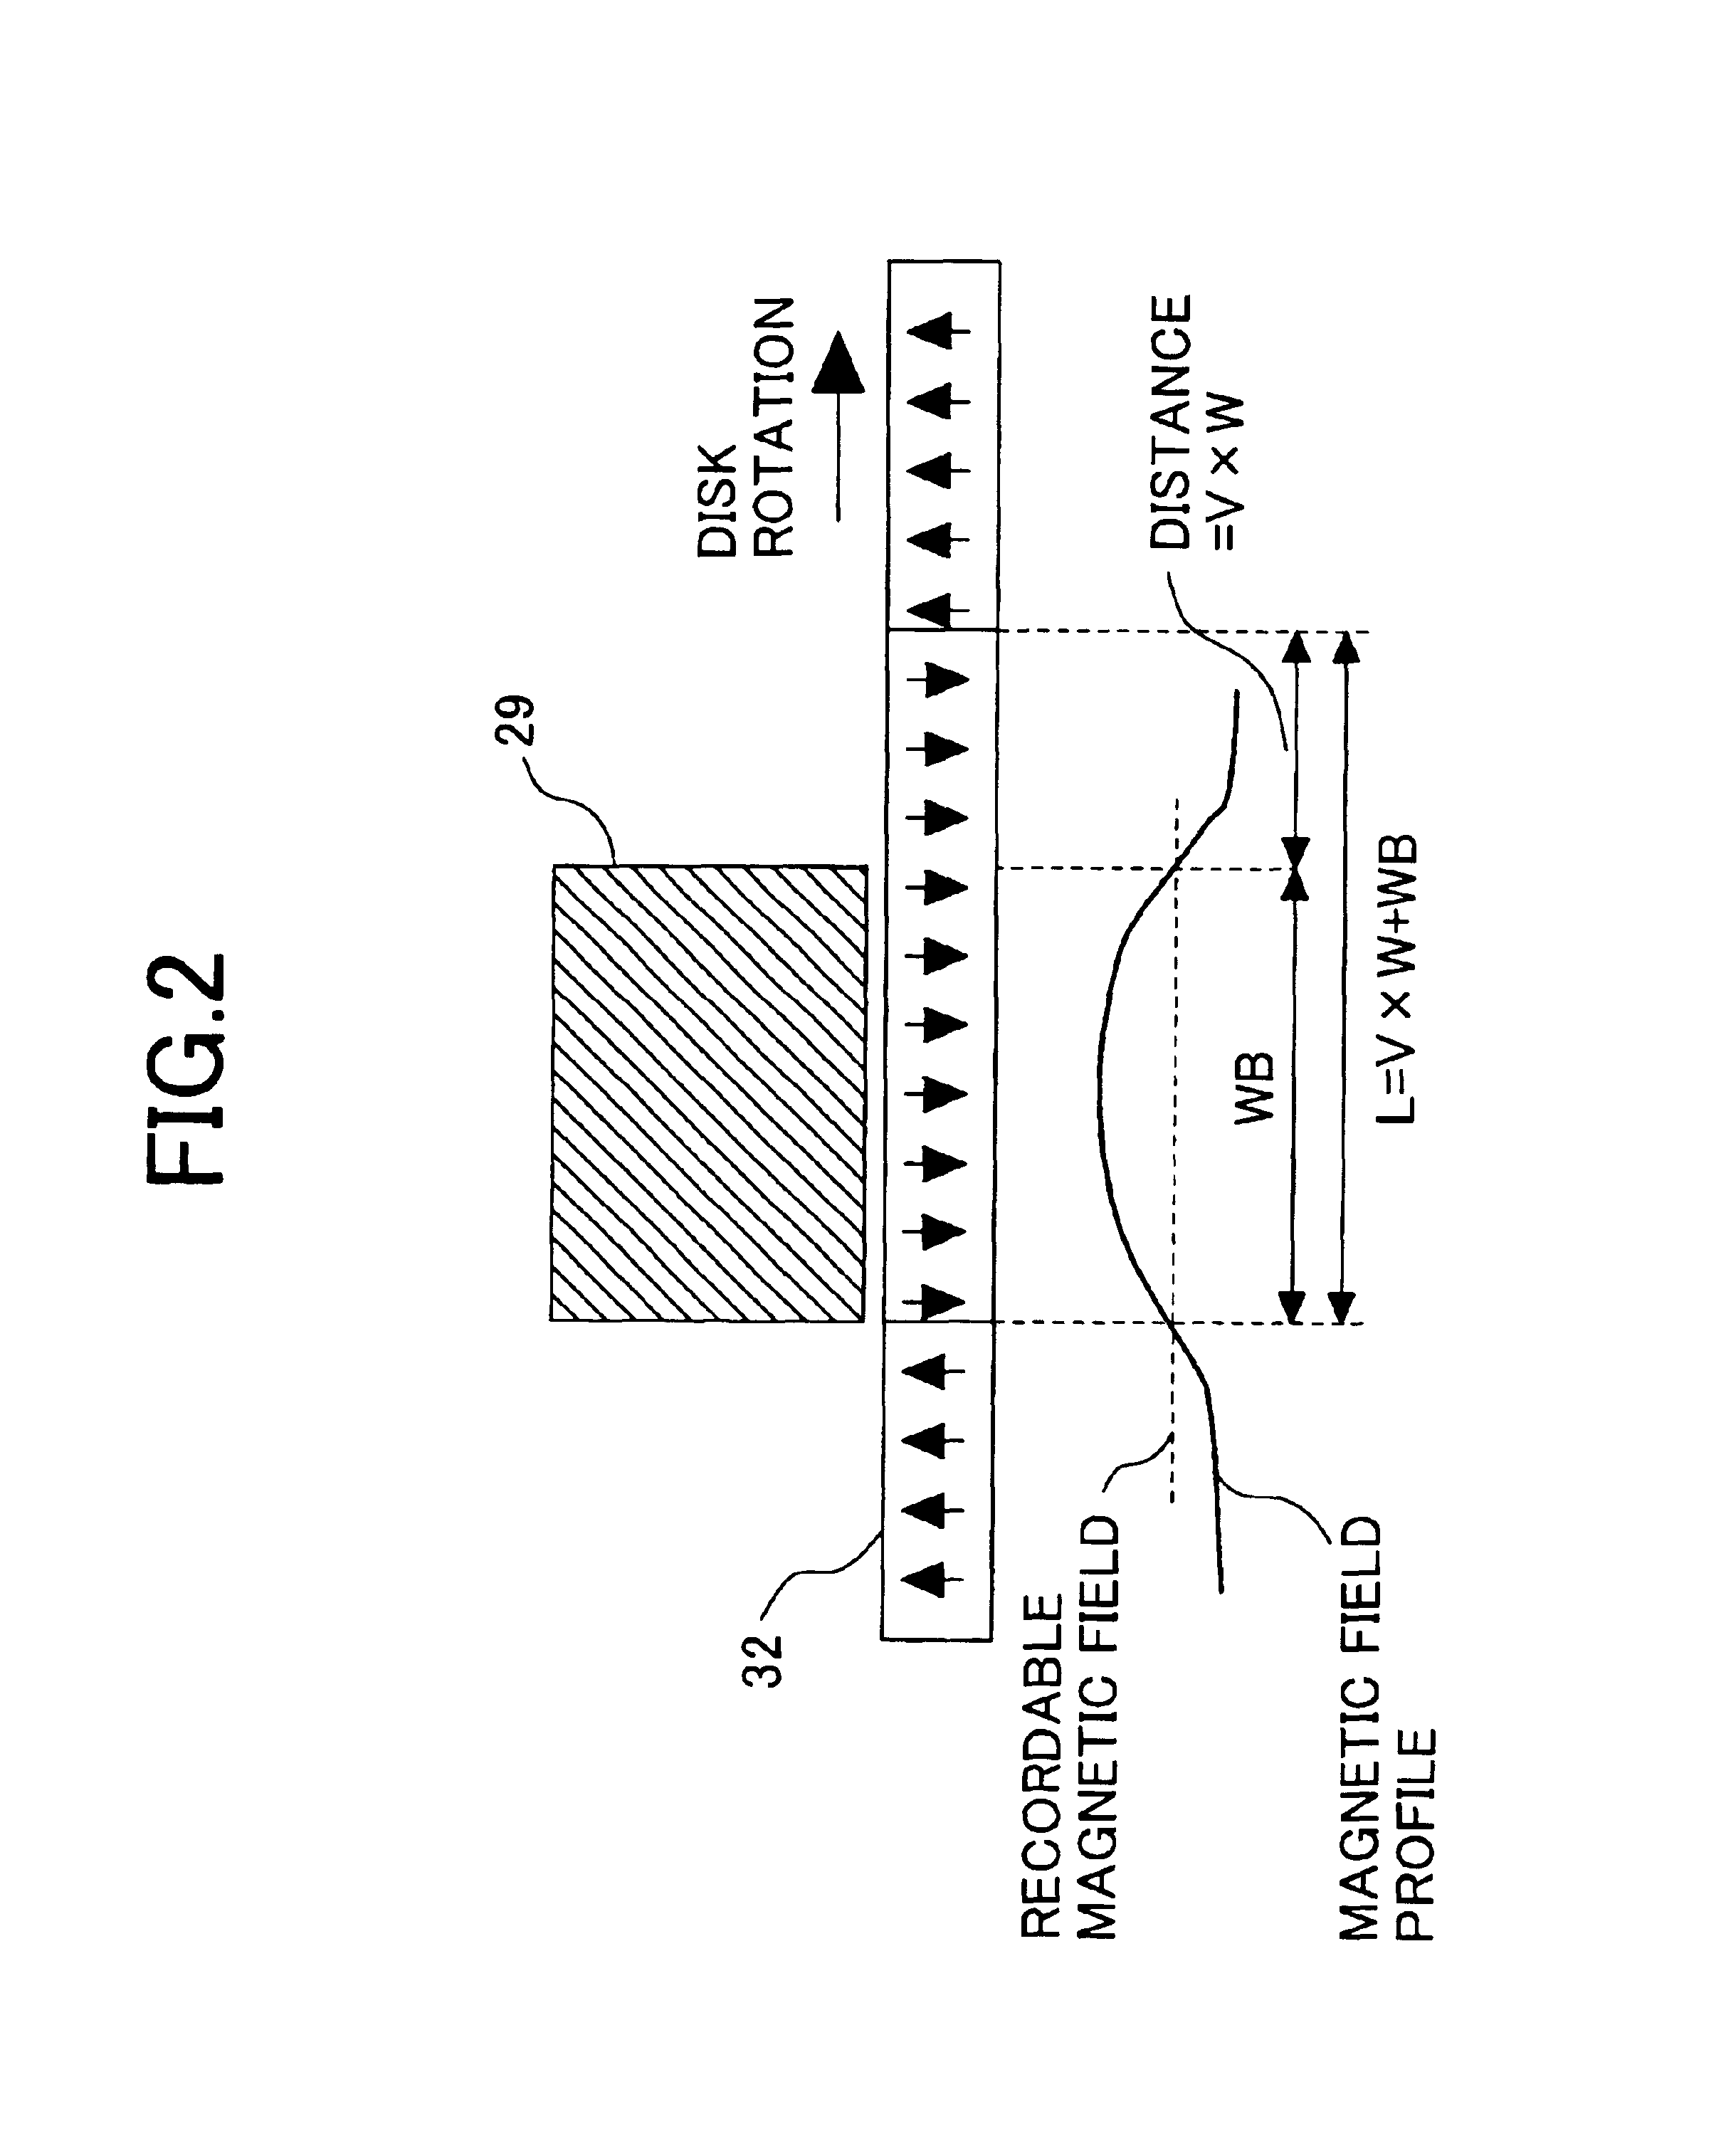 Magnetic recording apparatus and system for driving a magnetic recording medium